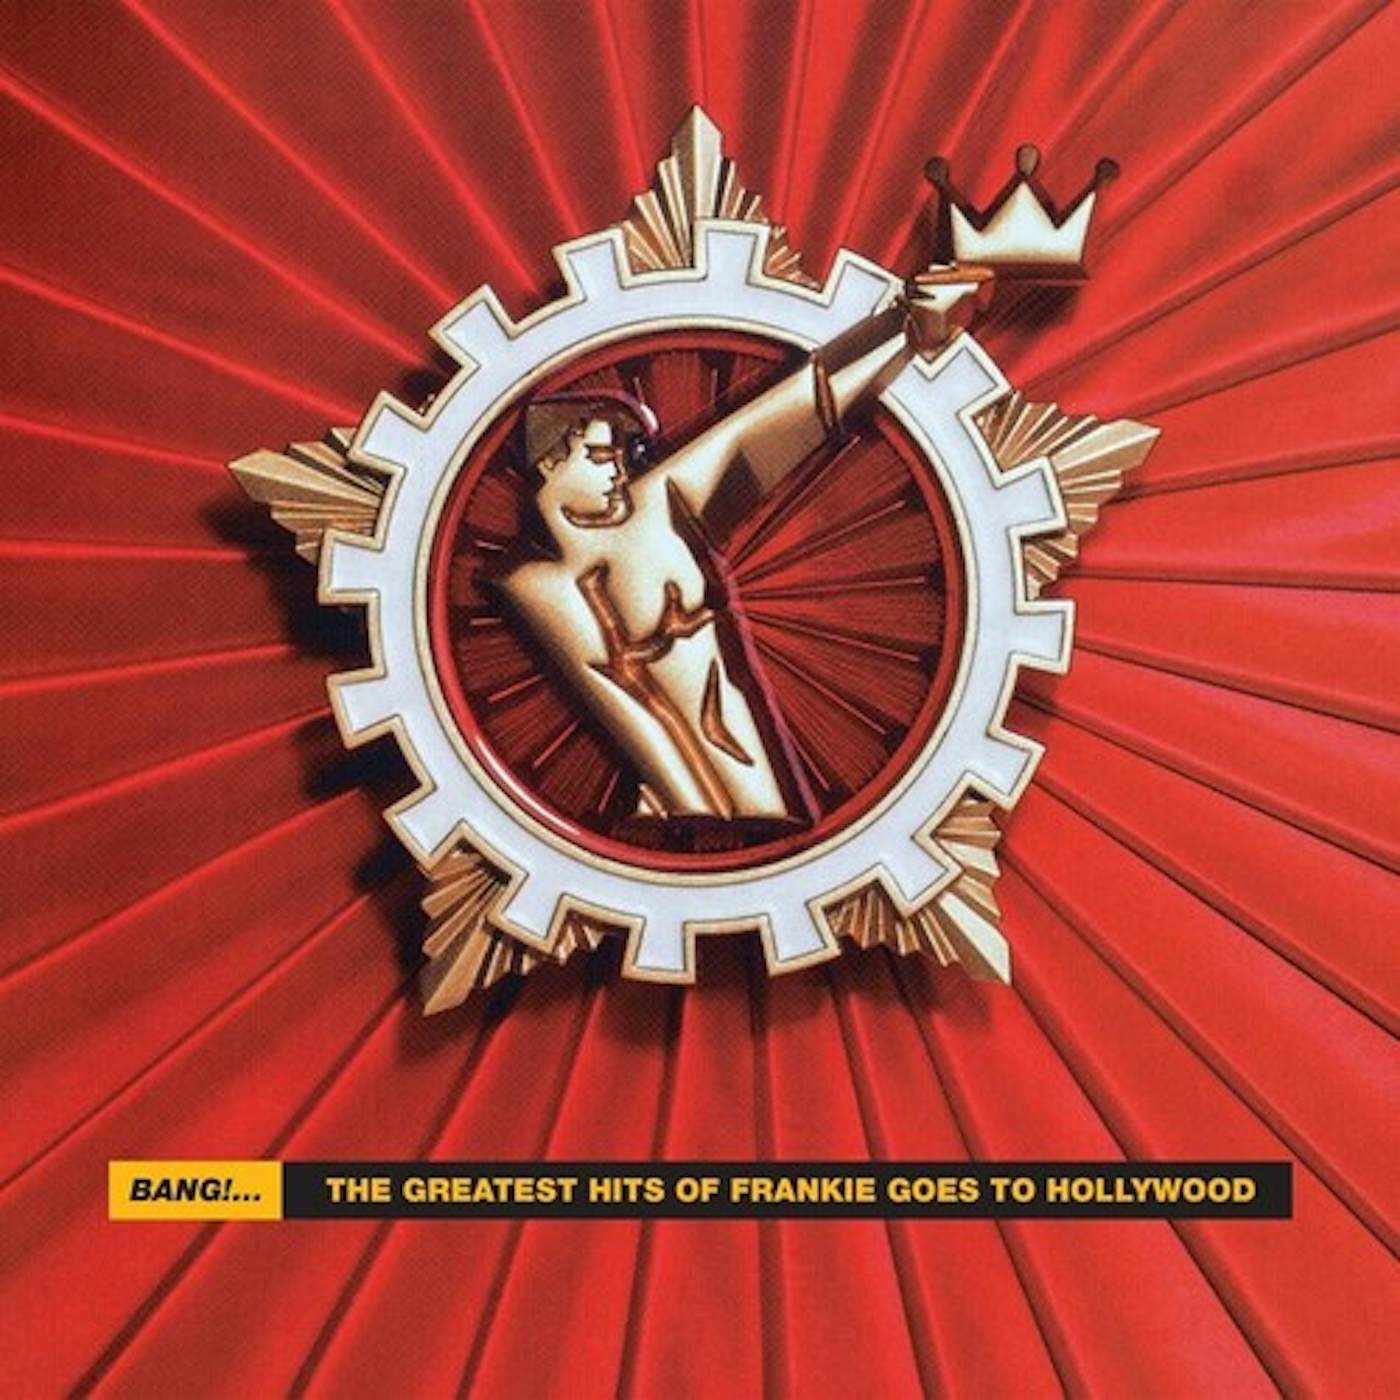 BANG: GREATEST HITS OF FRANKIE GOES TO HOLLYWOOD CD